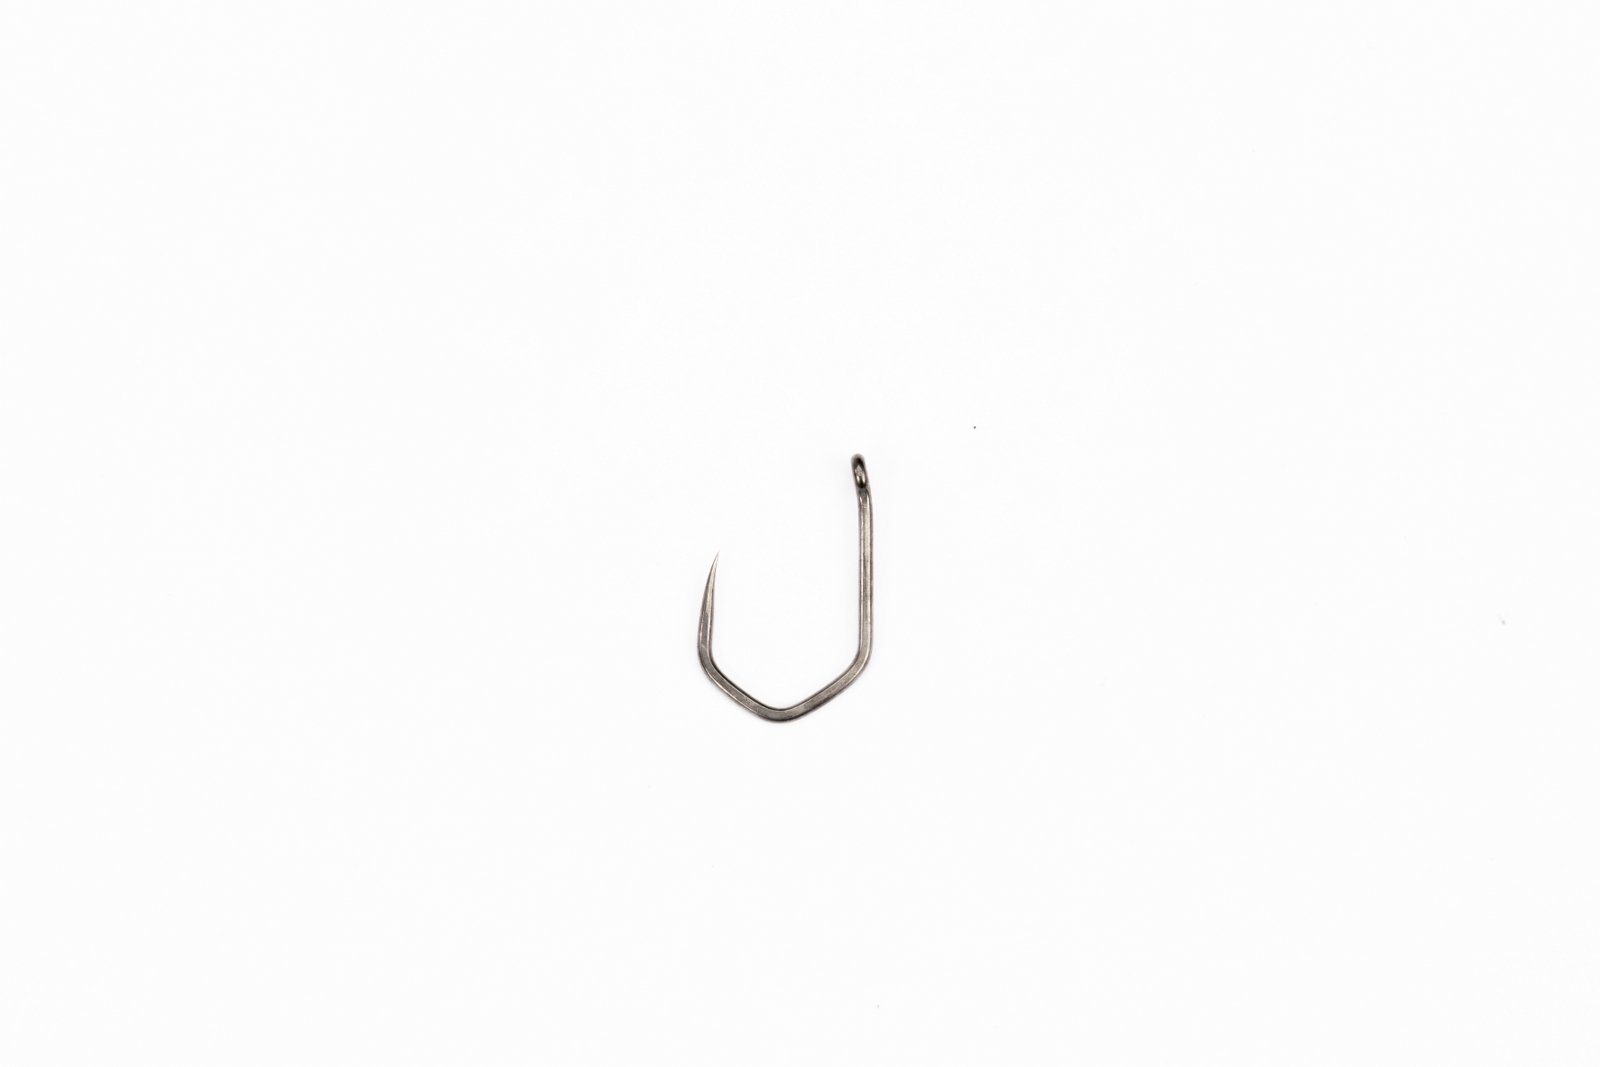 Nash Claw Size 6 Micro Barbed Hooks & Sharpening Tackle T6135 International Shop Europe